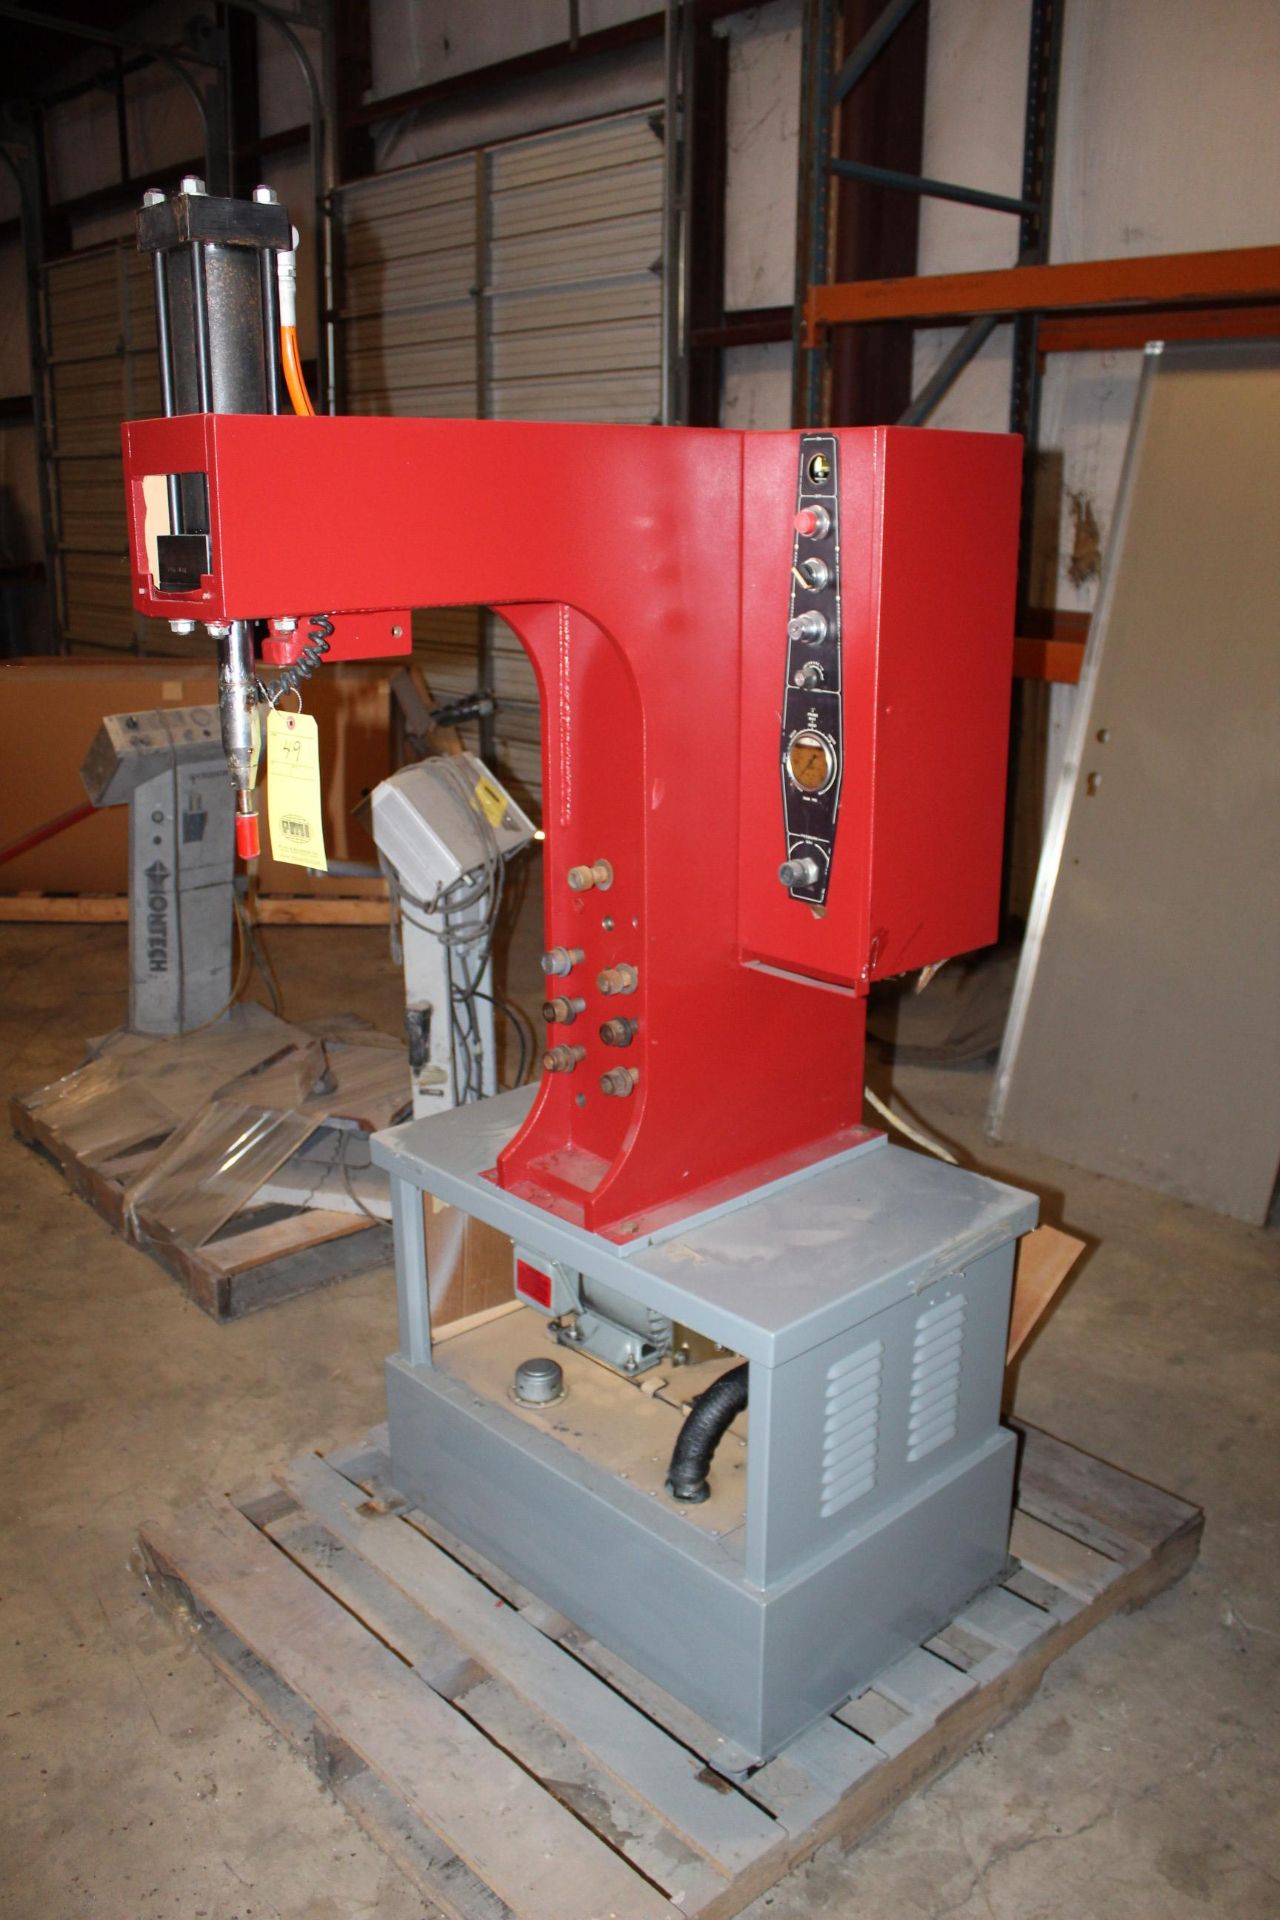 INSERTION PRESS, 6 T. cap. (missing lower part support) (Located at: Accurate, Inc., 1200 East 4th